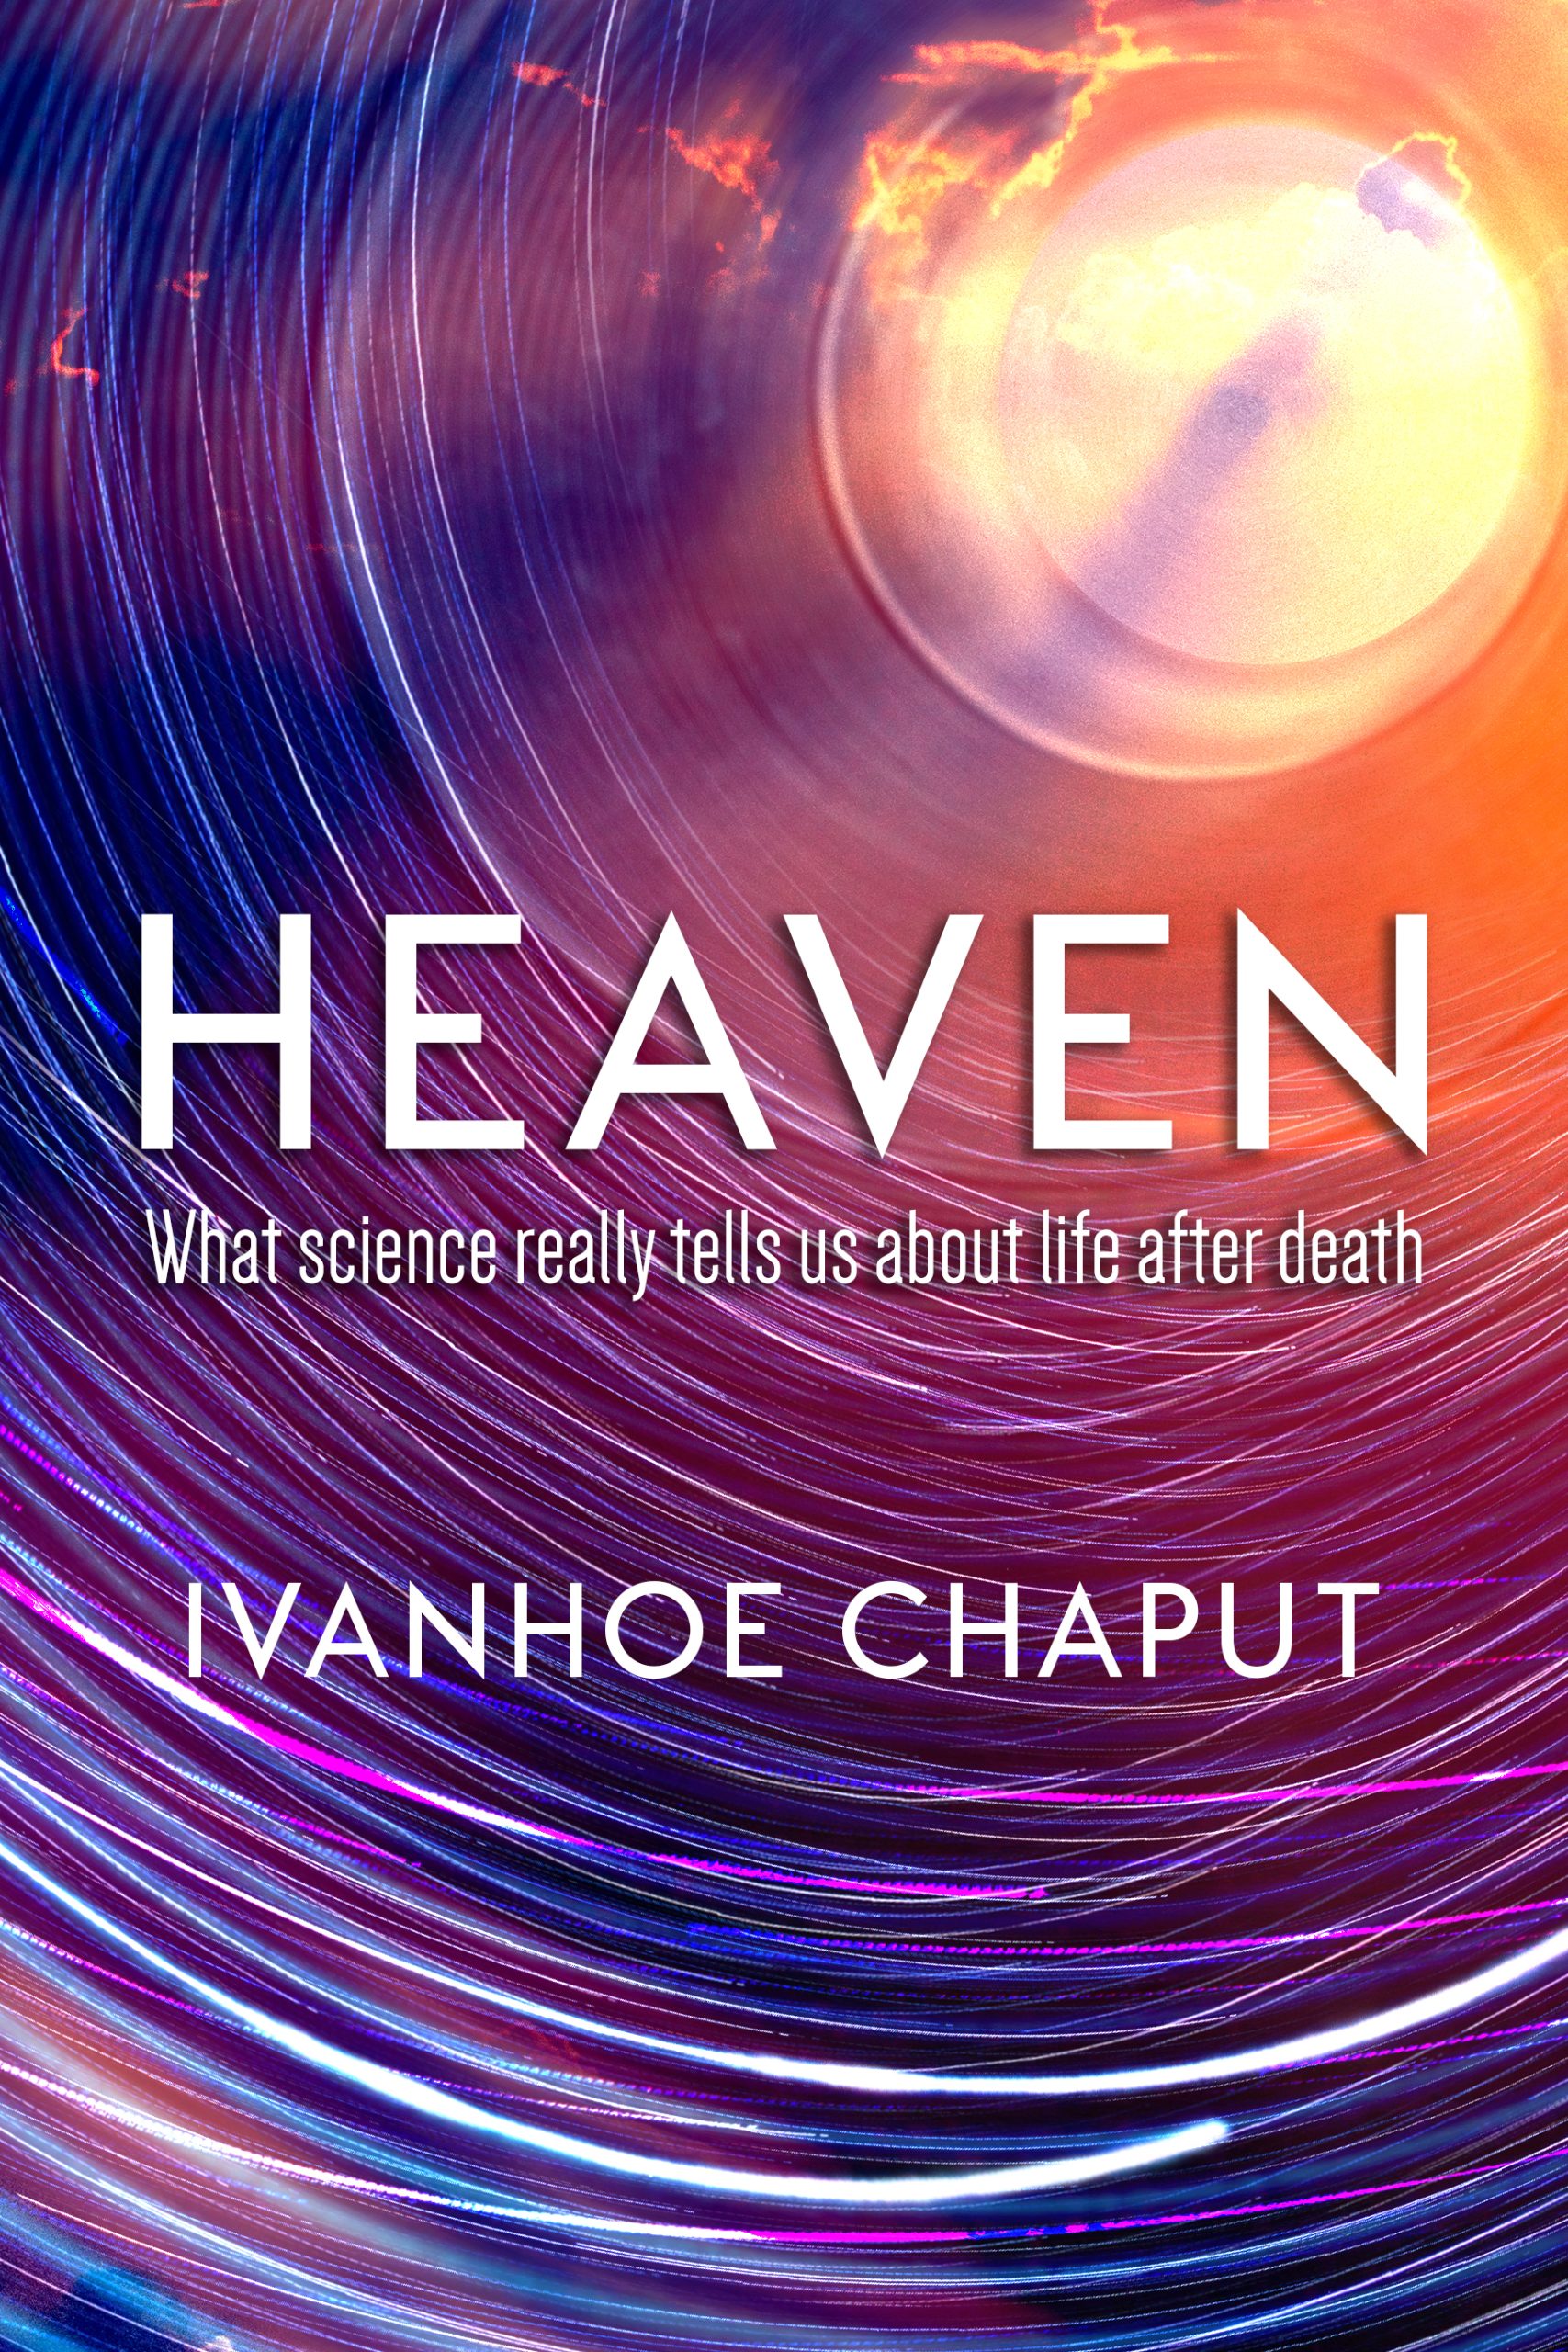 An abstract illustration of "heaven." There is a circular tube with lots of spiraling lights and at the right-hand corner is a circular opening of clouds and a stream of light shining through. In the middle of the cover is the word HEAVEN in really large sans-serif font. Beneath that, in a smaller font are the words WHAT SCIENCE REALLY TELLS US ABOUT LIFE AFTER DEATH. And below that is the author's name, IVANHOE CHAPUT.